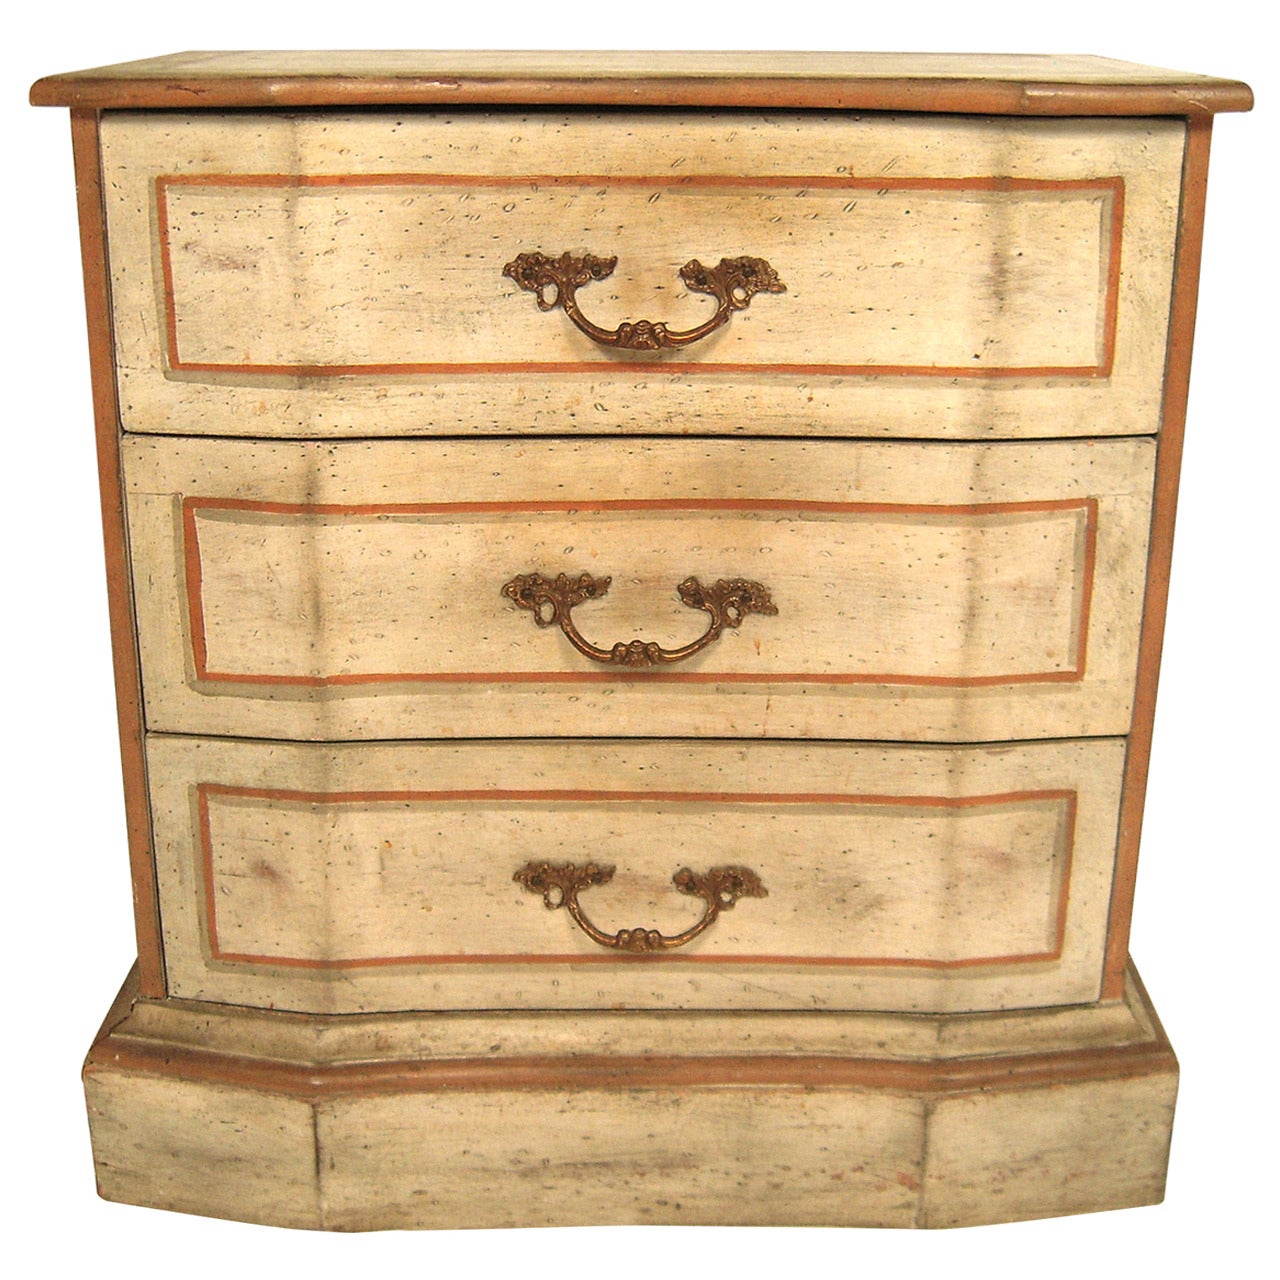 Diminutive Painted Italian Chest of Drawers